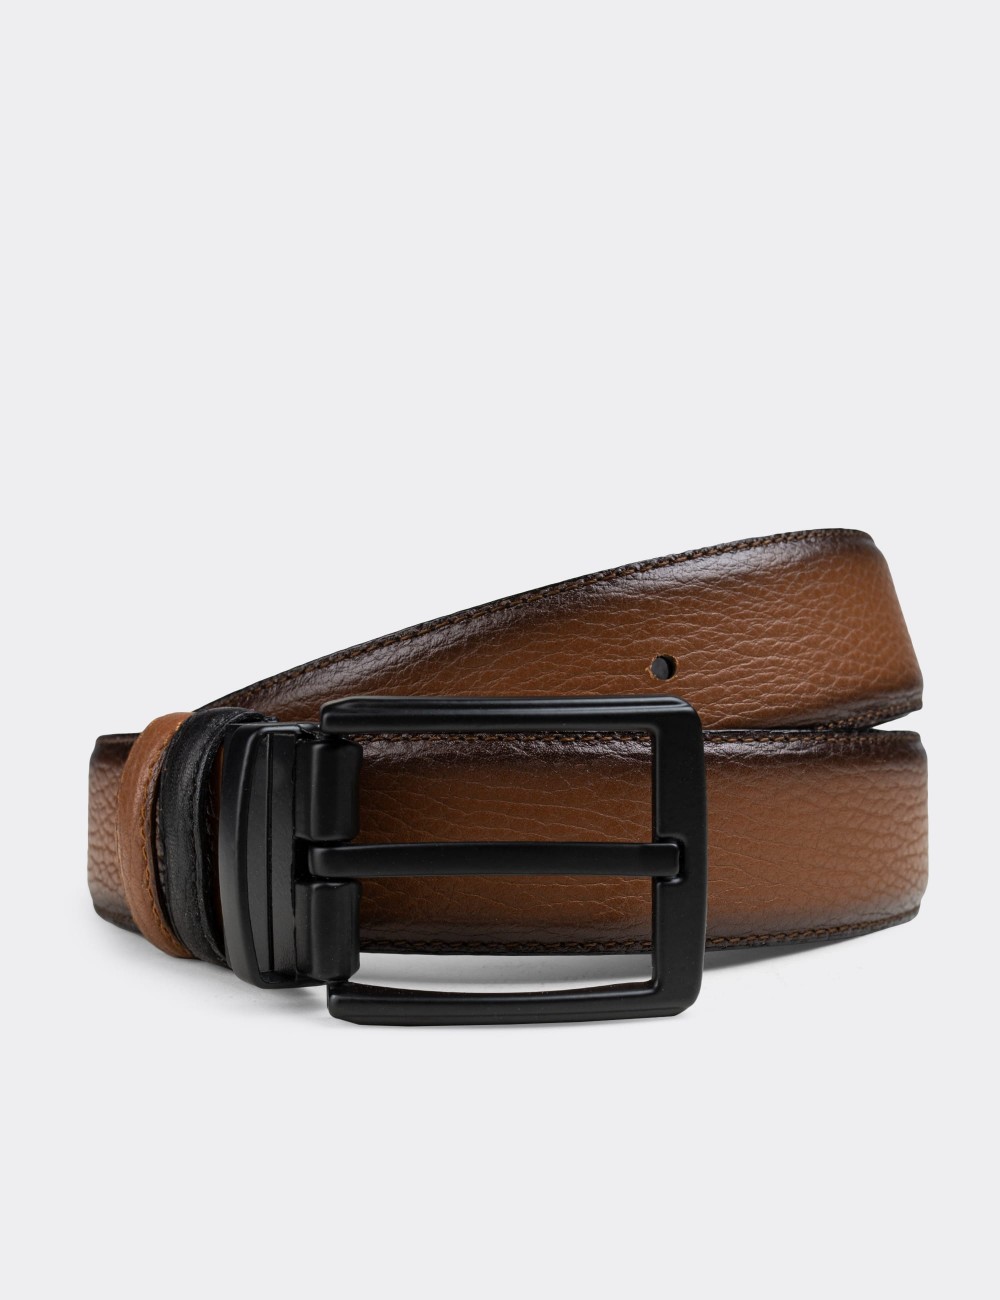  Leather Tan and Black Double Sided Men's Belt - K0408MTBAW01